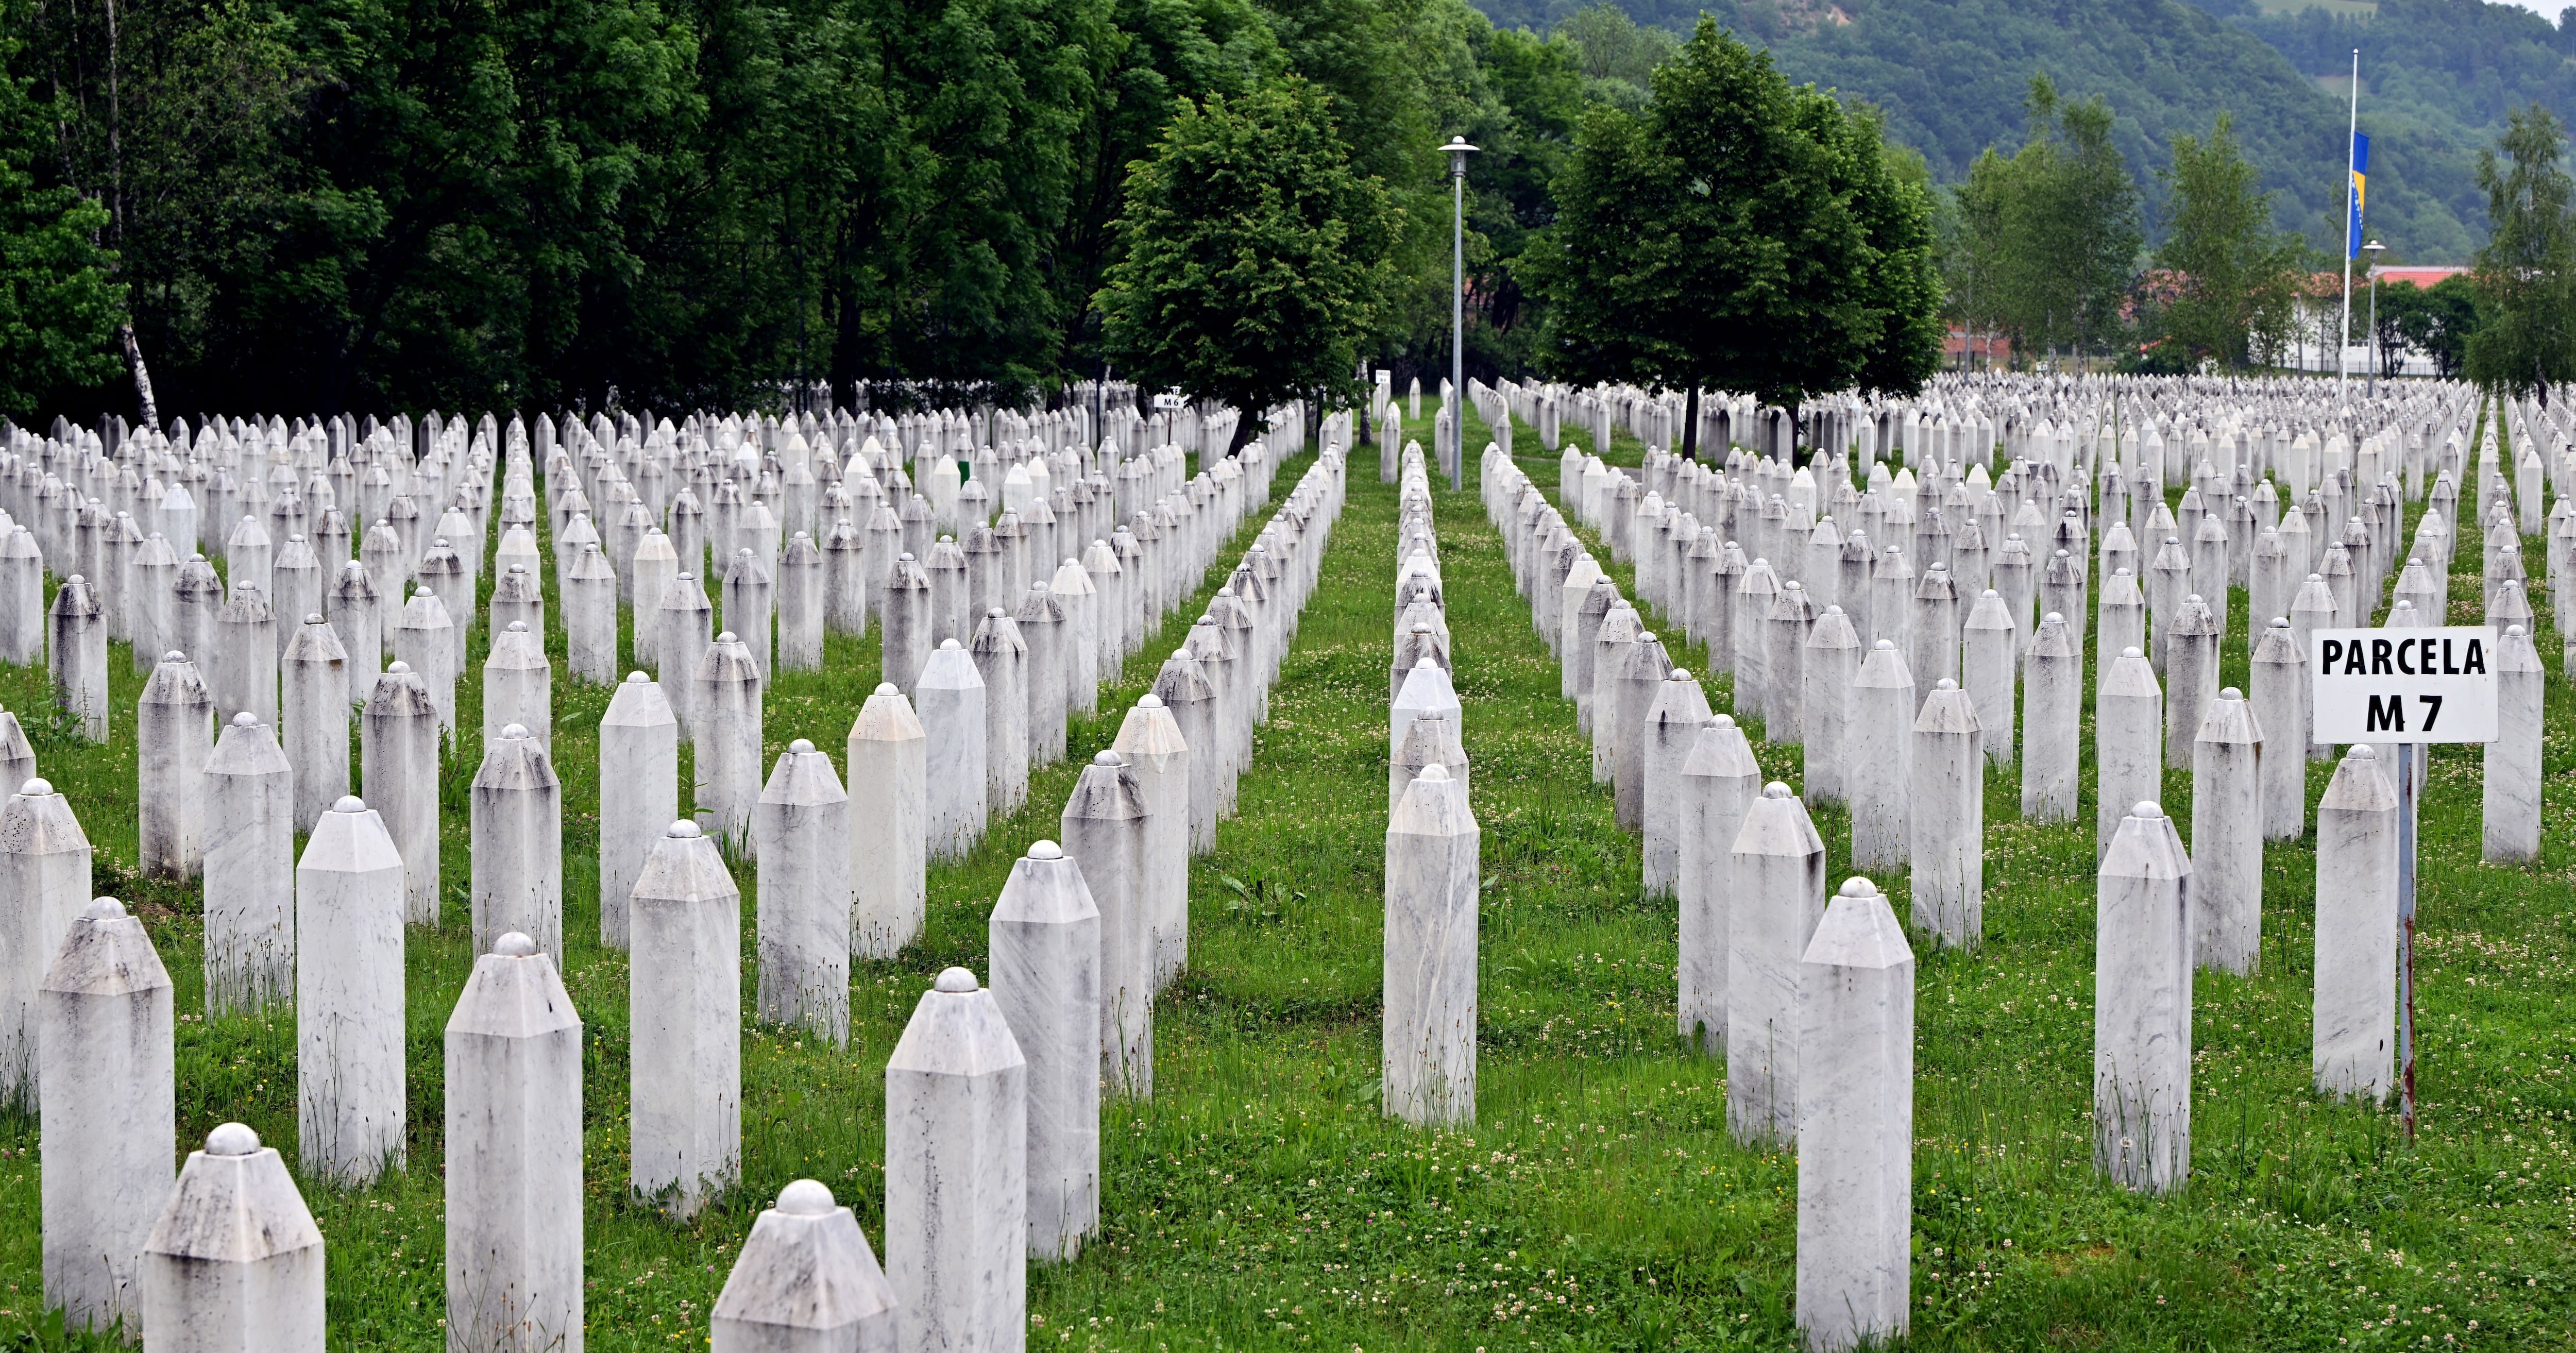 Srebrenica-Potocari memorial cemetery, where more than 8 thousand people were murdered.  (Photo: AFP)